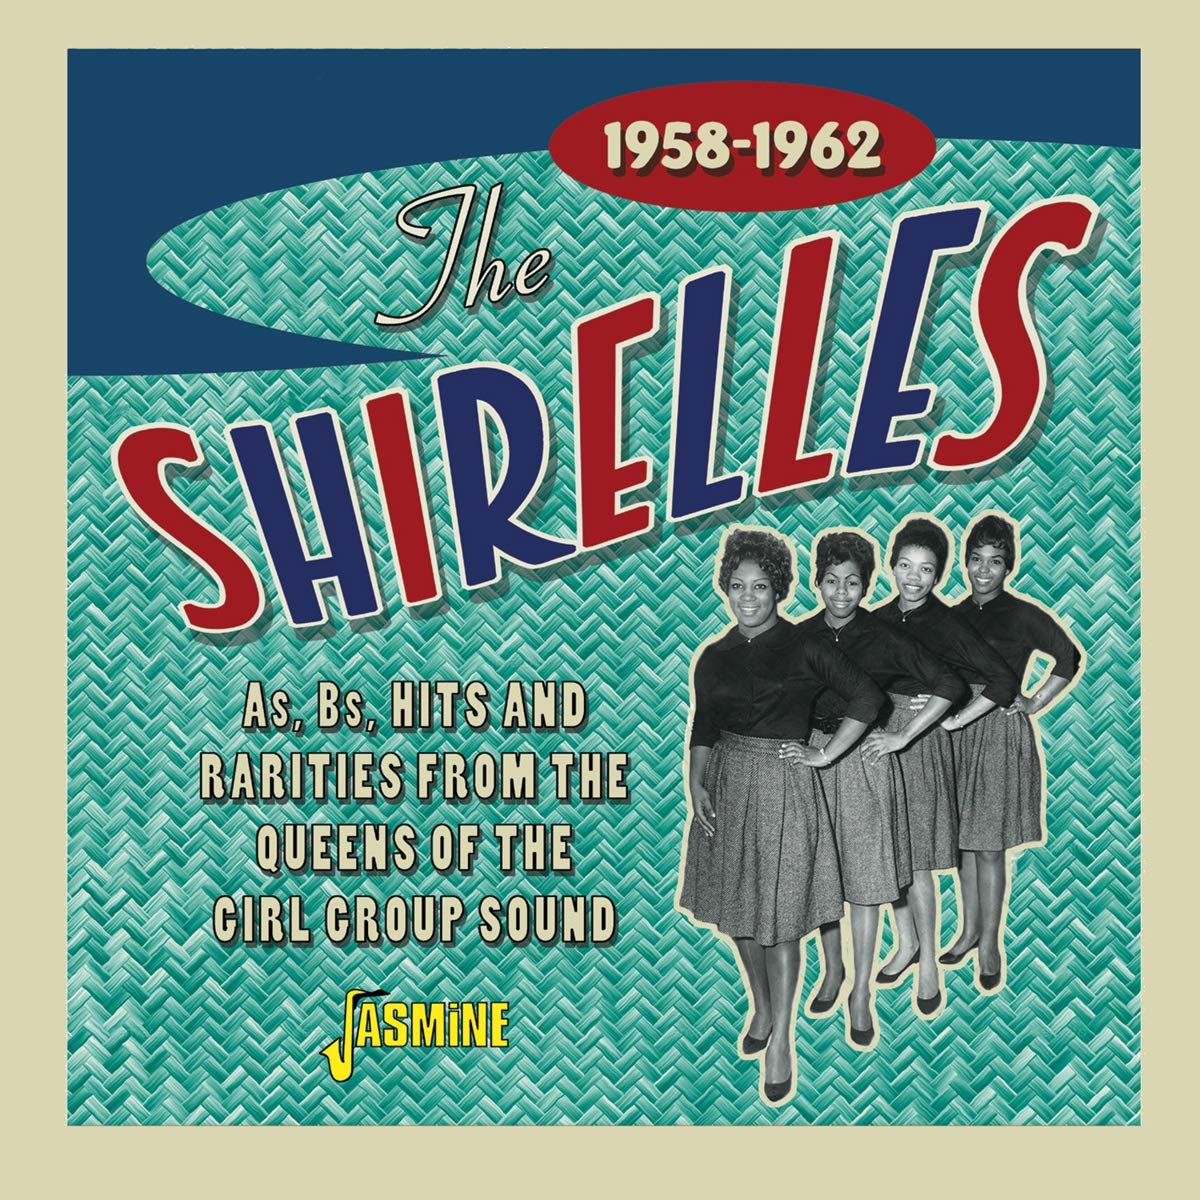 The Shirelles - As, Bs, Hits And Rarities From The Queens Of The Girl Group Sounds 1958-1962